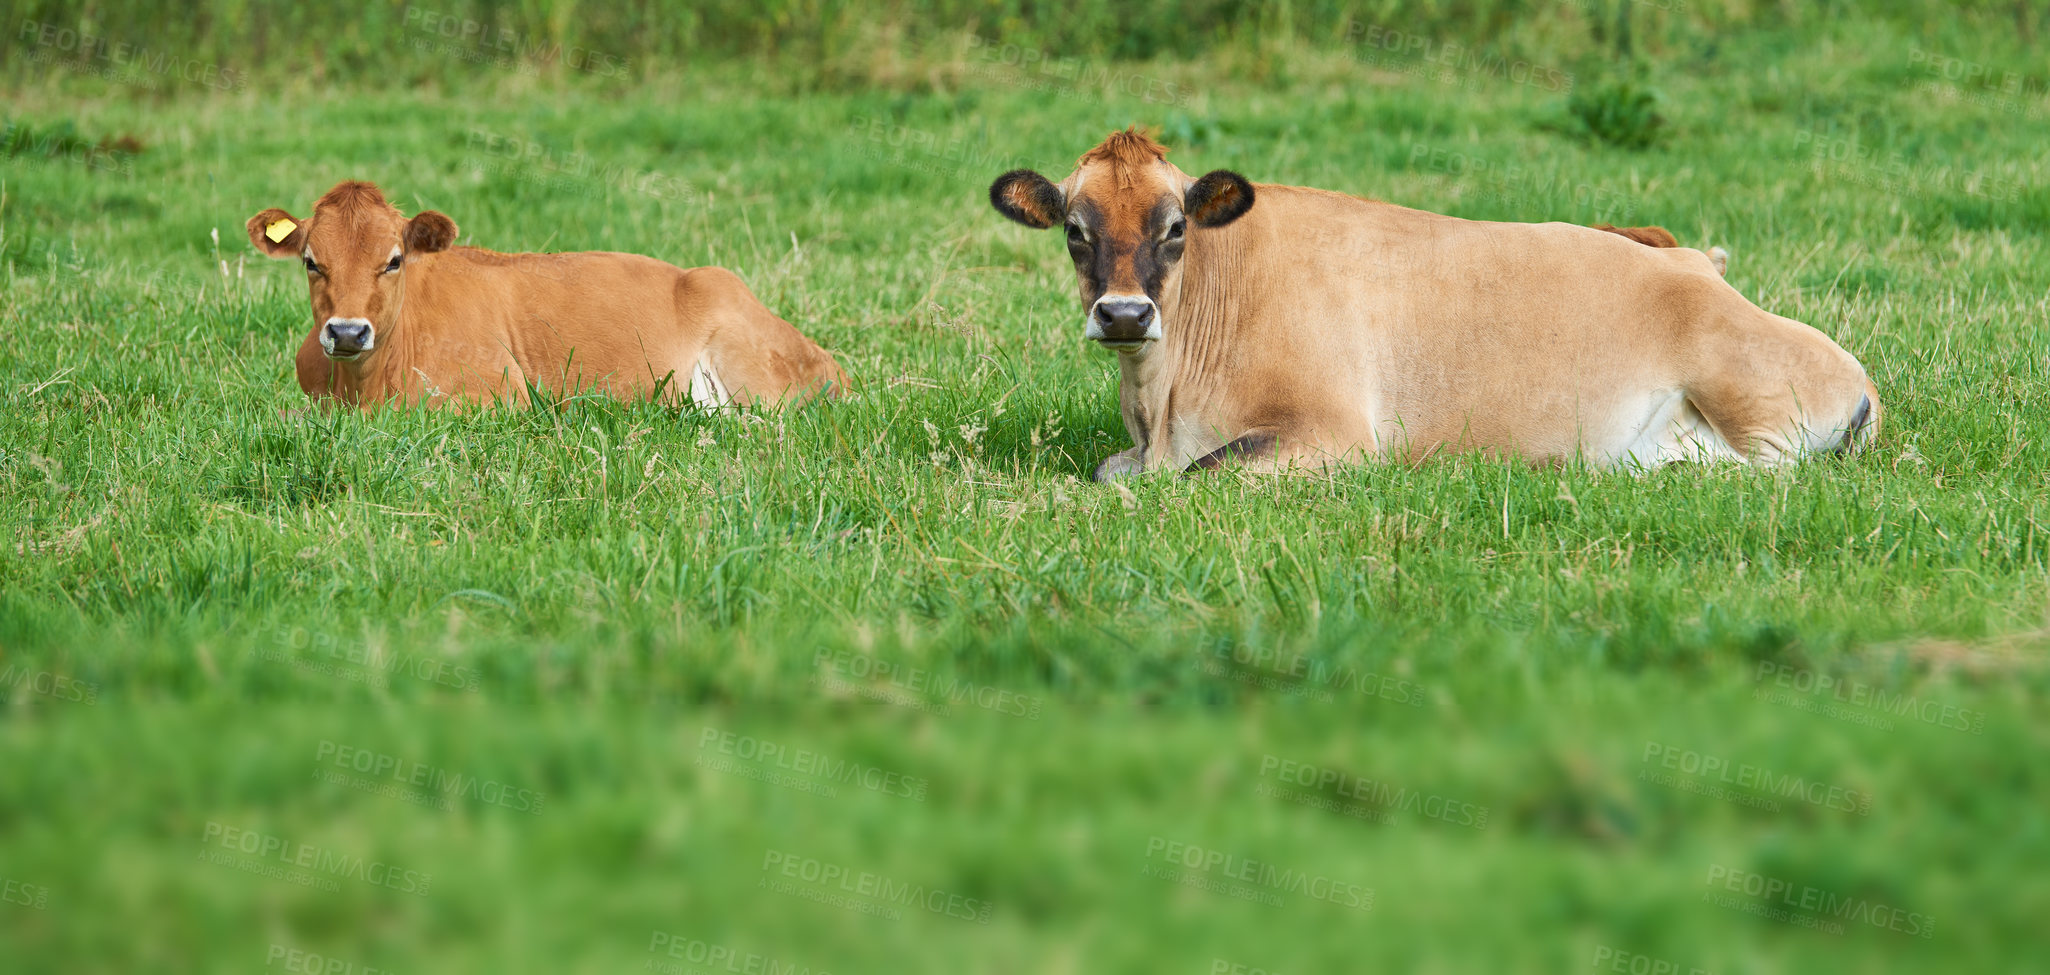 Buy stock photo Two brown cow lying down on an organic green dairy farm in the countryside. Cattle or livestock in an open, empty and secluded grassy field or meadow. Animals in their natural environment in nature